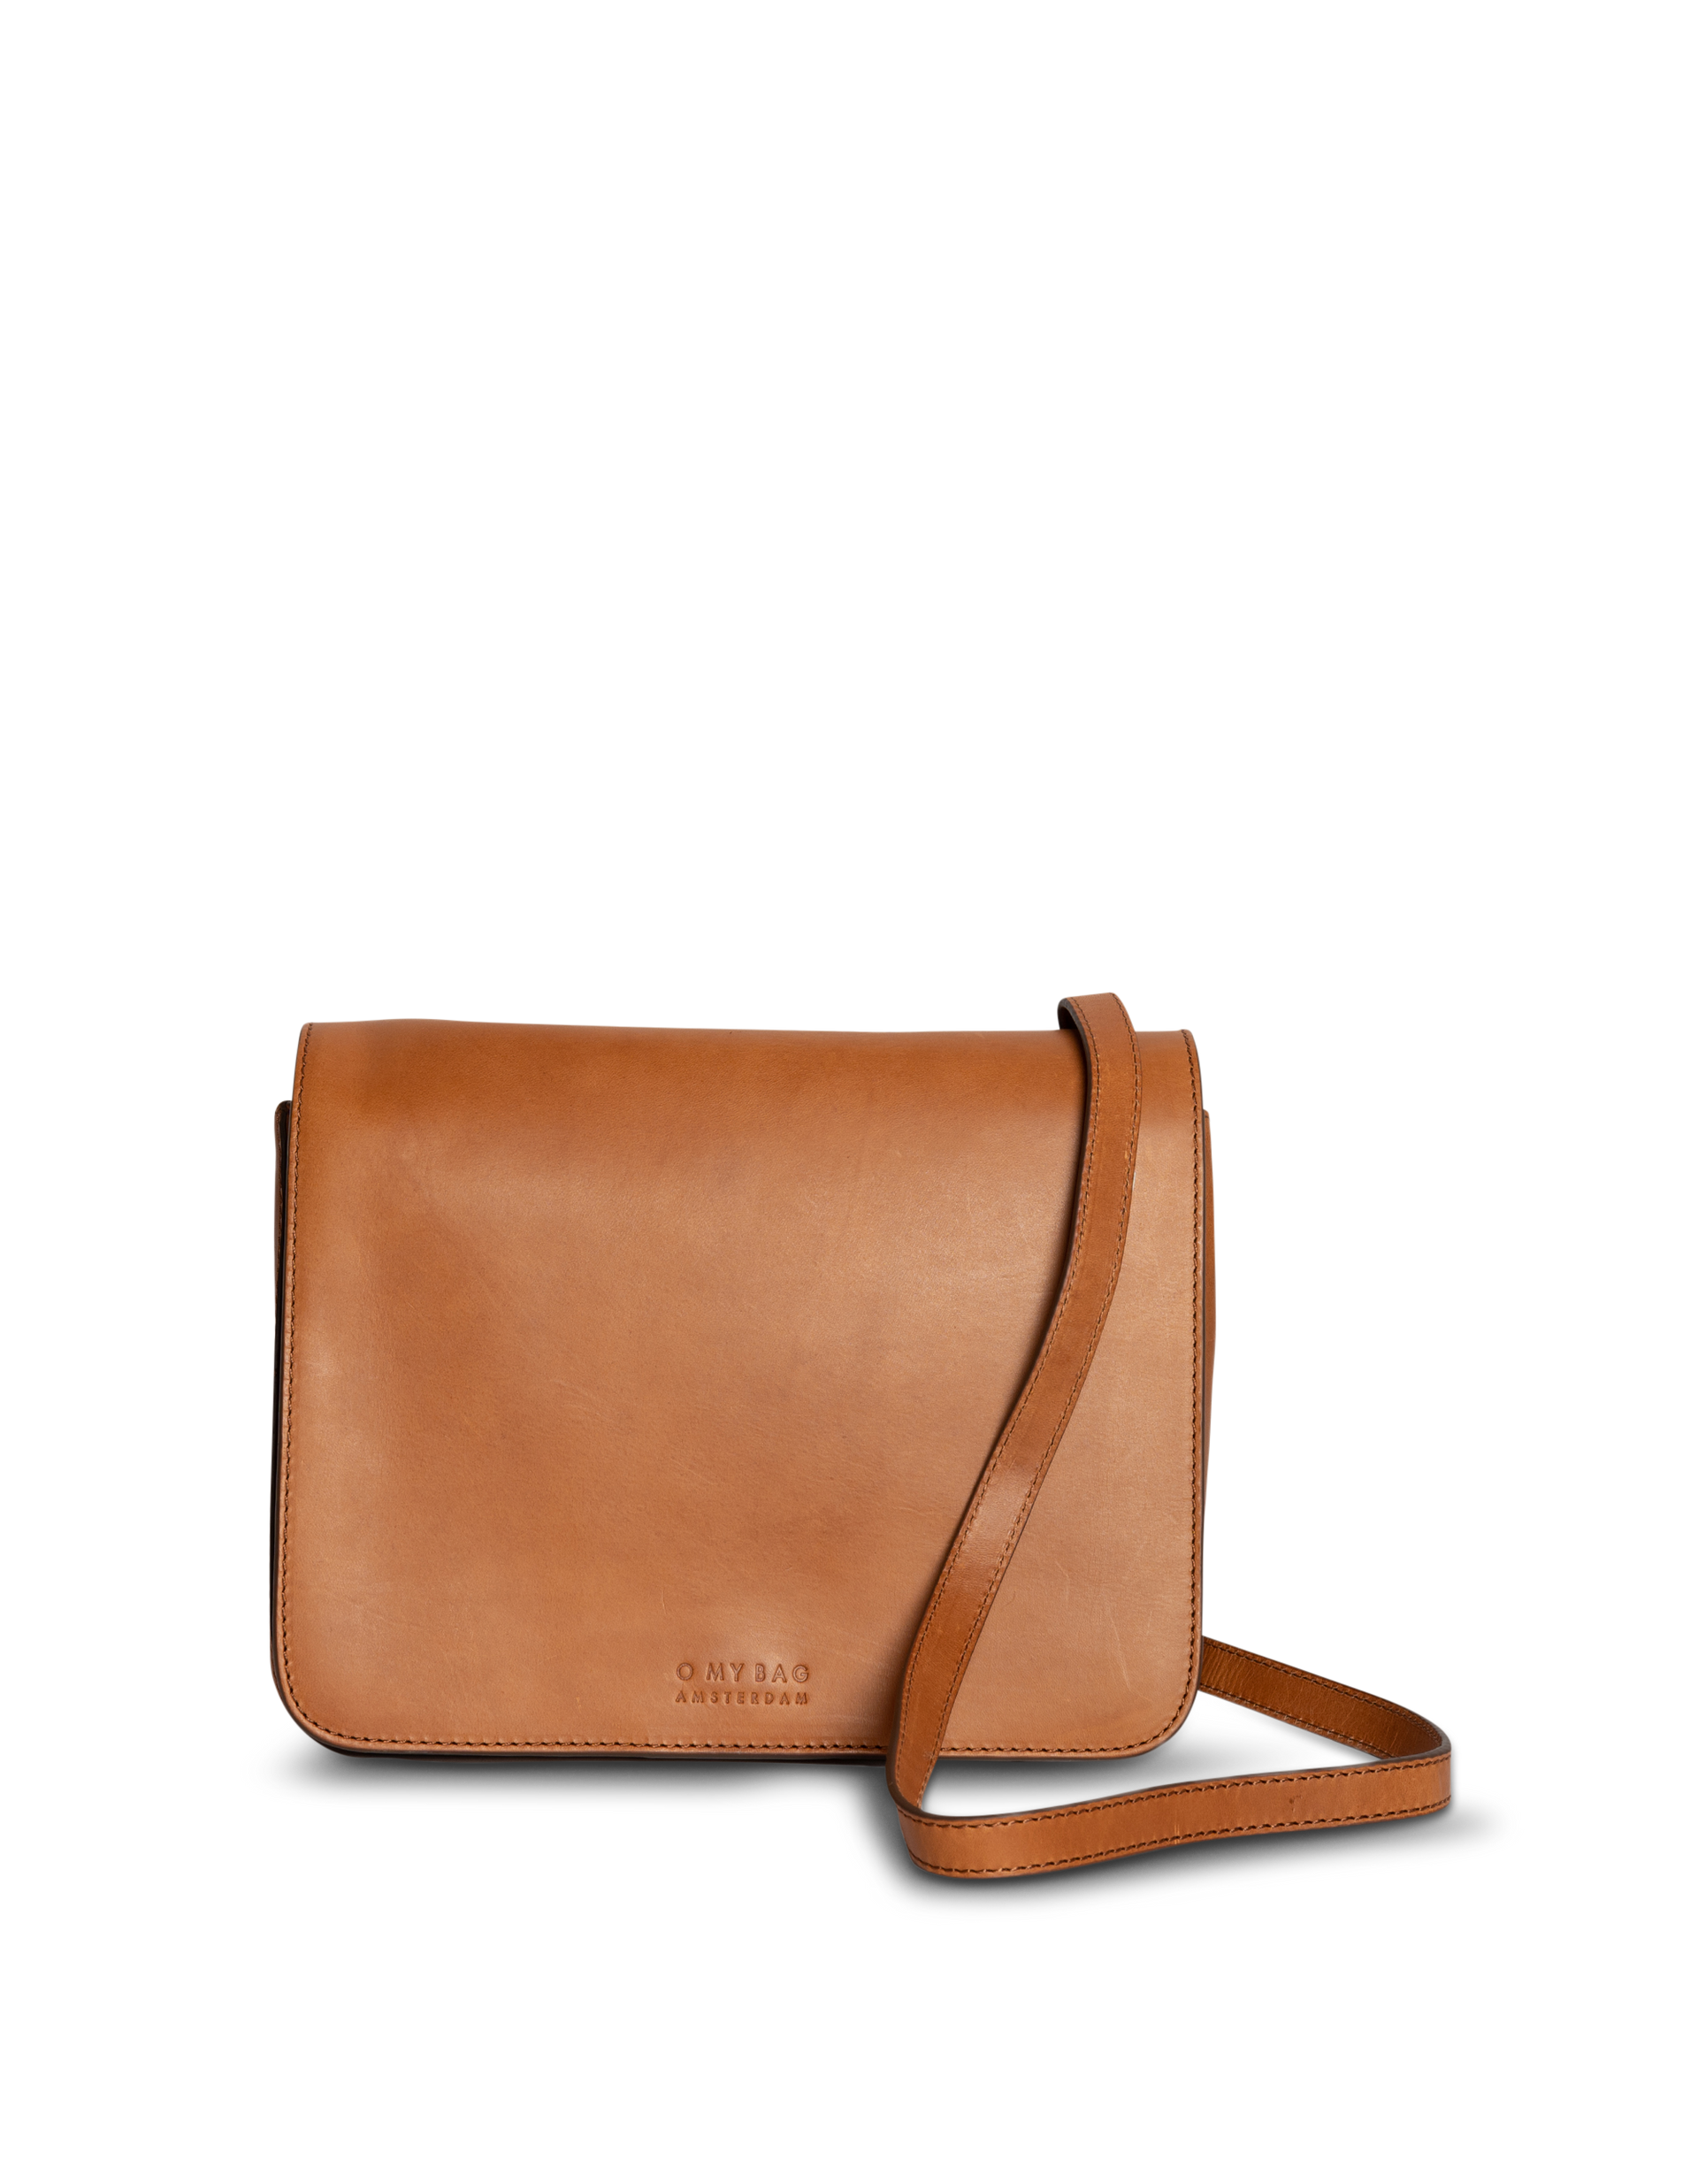 Lucy in cognac classic leather. Crossbody handbag. Front product image.